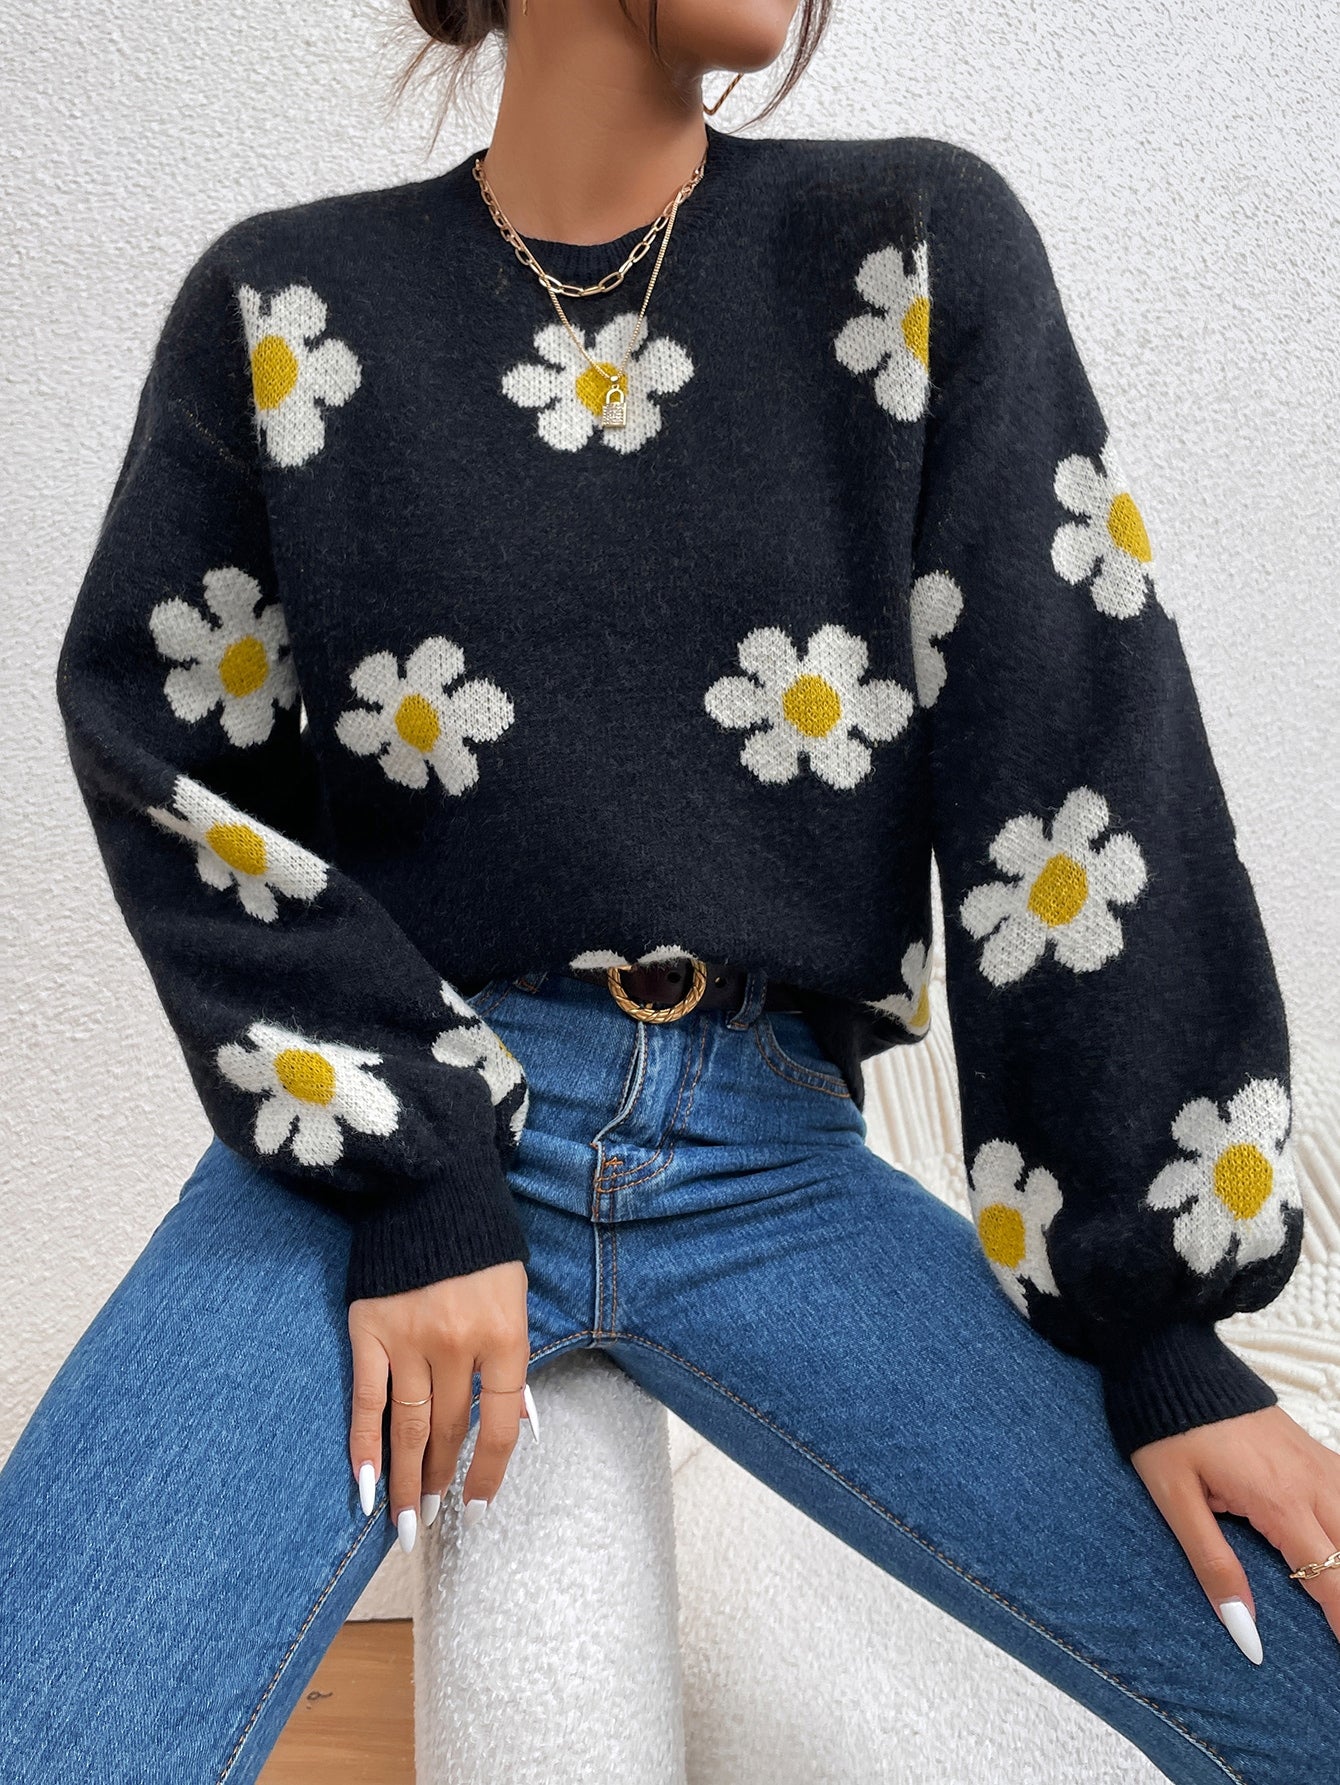 Cute Daisy Flower Cardigan Sweaters for Women Y2k Aesthetic 90s Button Down  Open Front Sweater Plus Size Baby Blue at Amazon Women's Clothing store